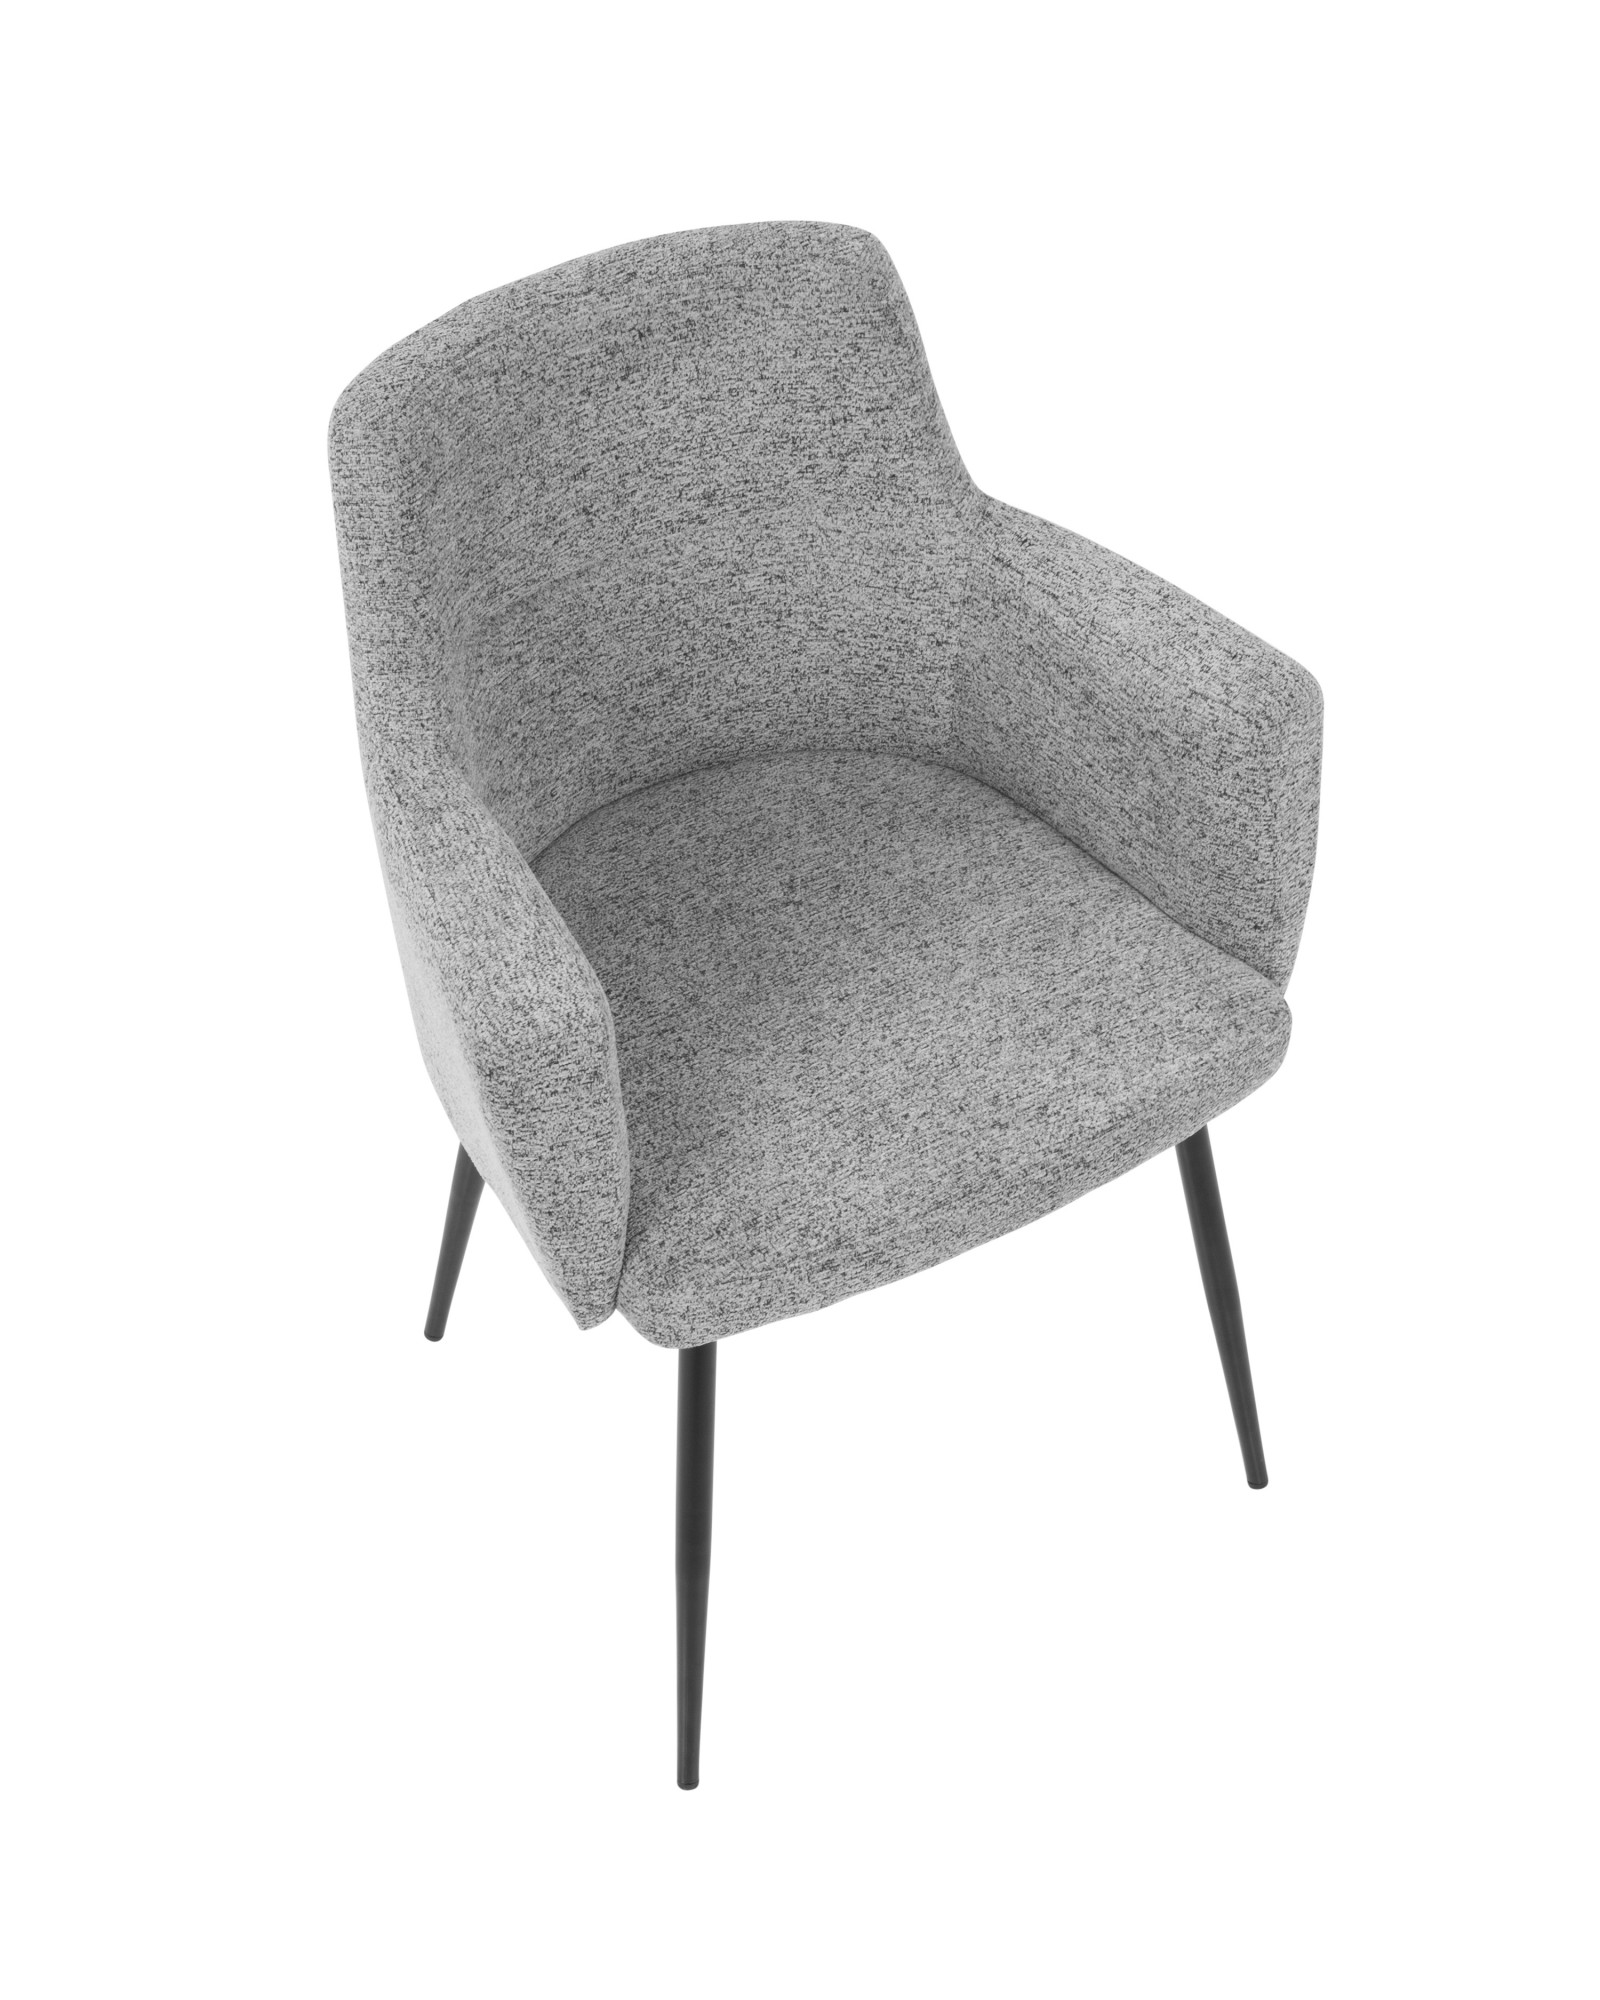 Andrew Contemporary Dining/Accent Chair in Black with Grey Fabric - Set of 2